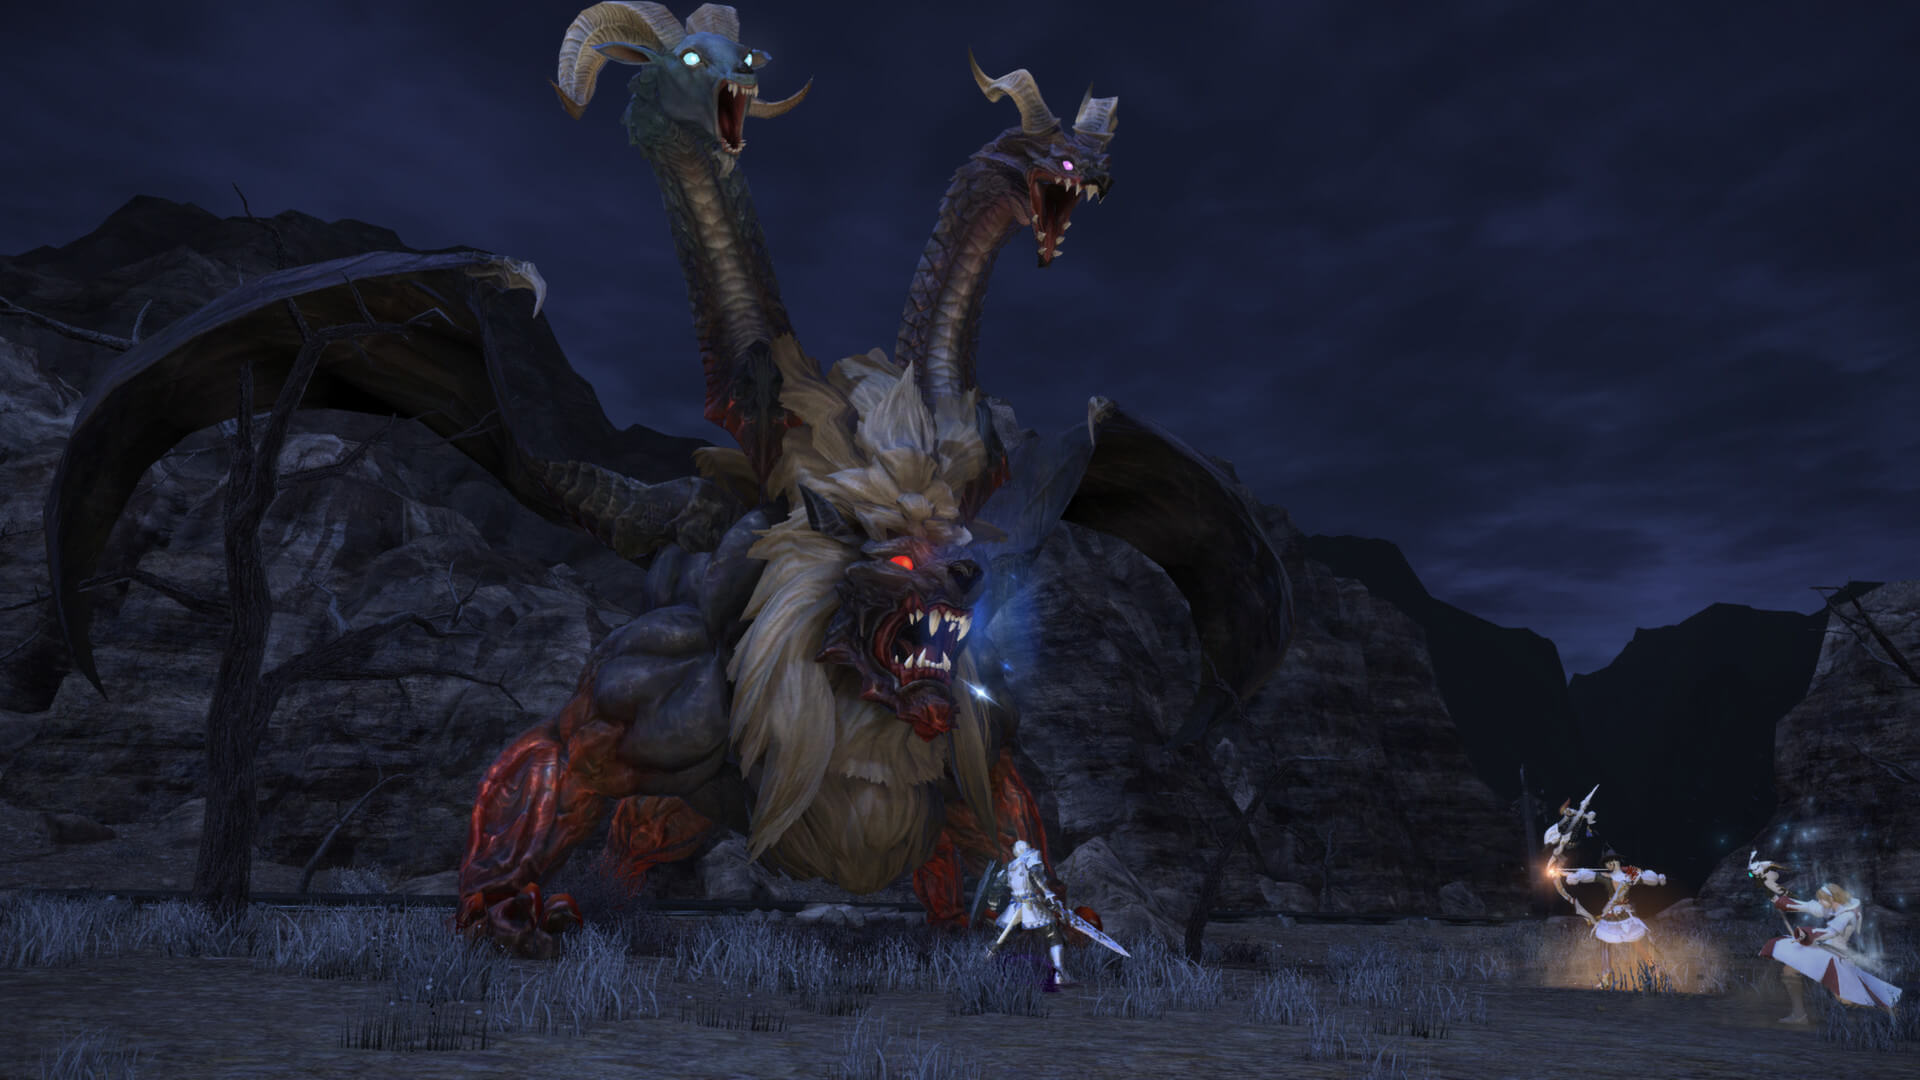 The party facing a chimera in Final Fantasy XIV